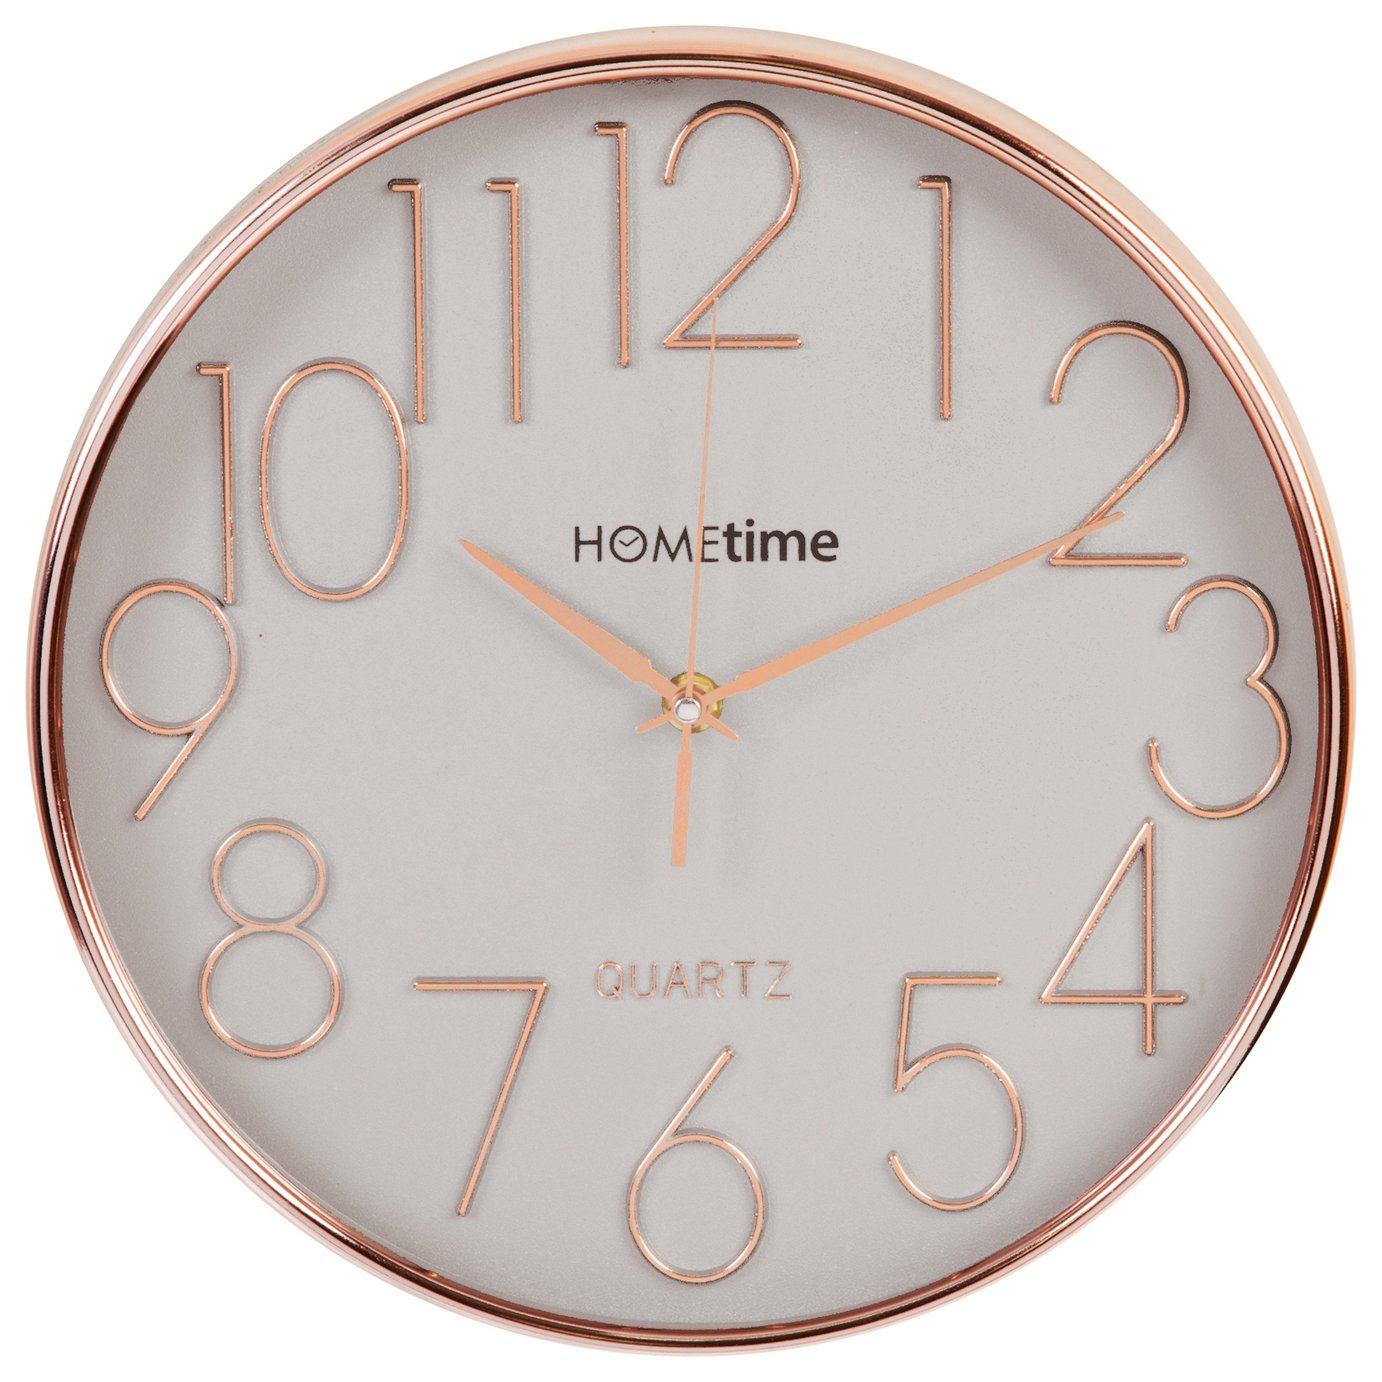 Hometime Wall Clock Review